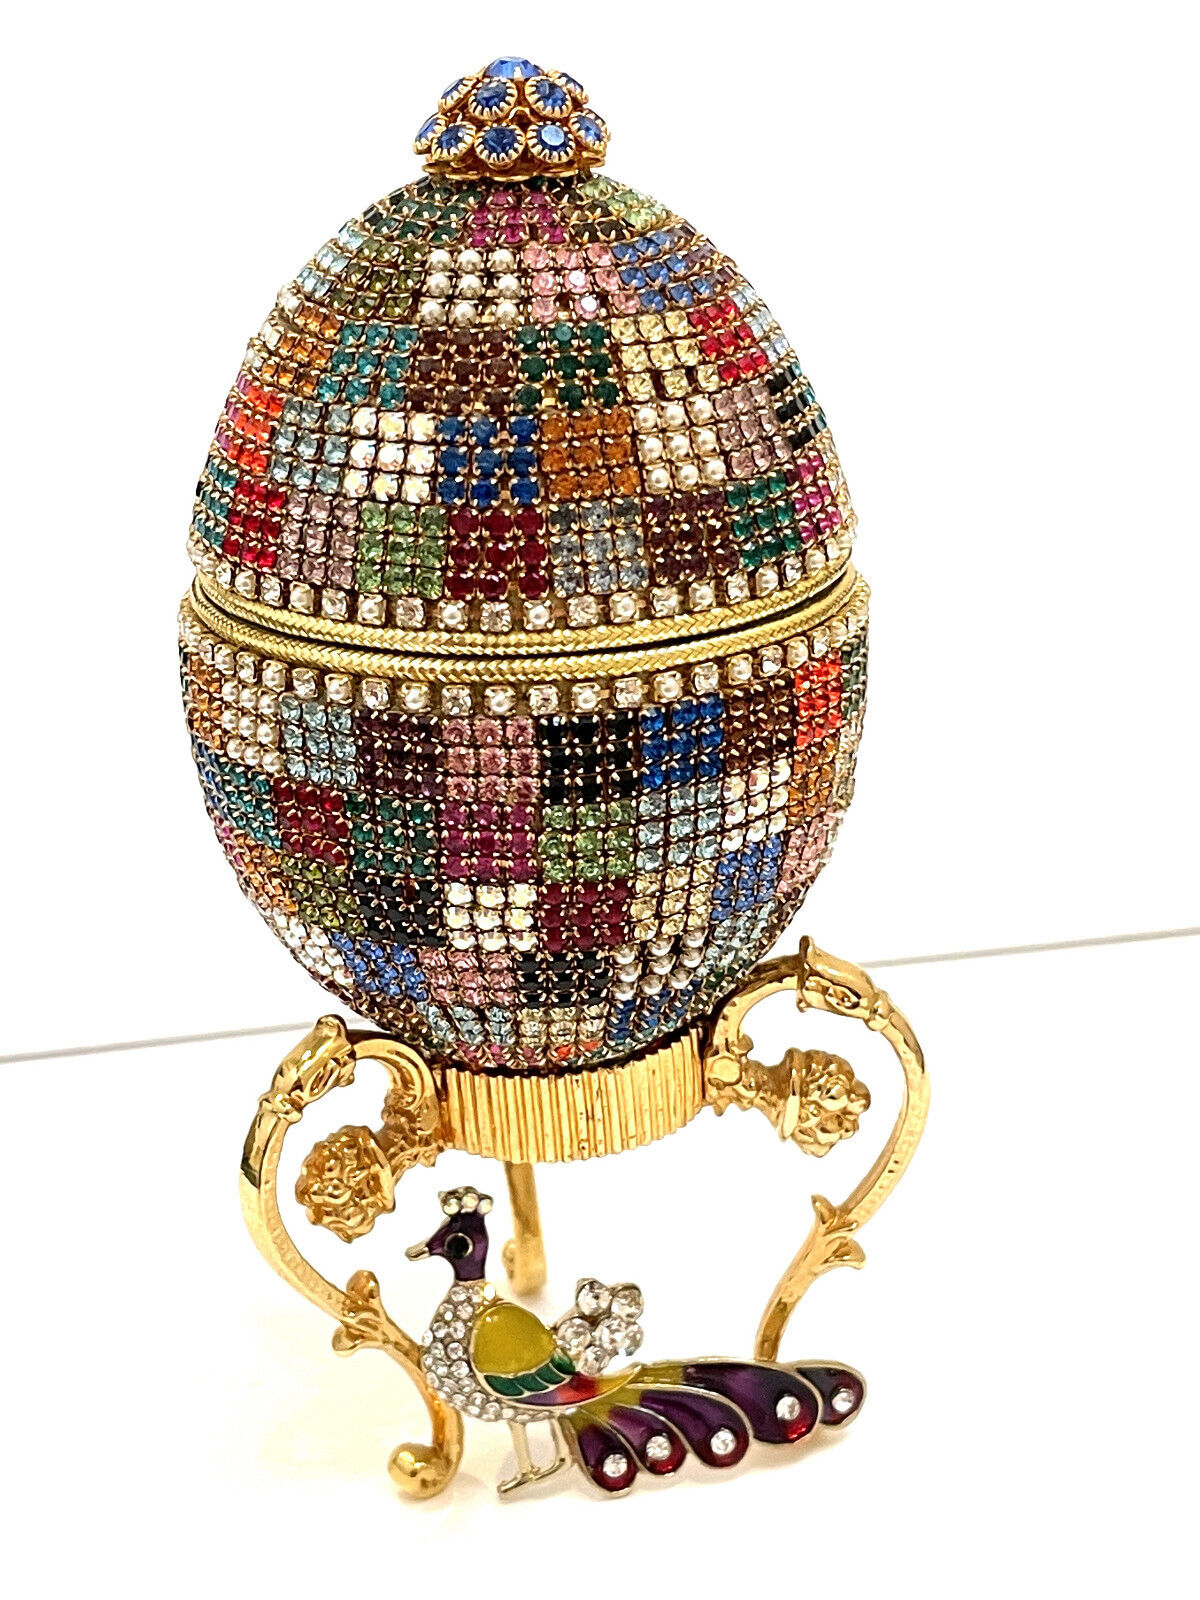 1994 Antiques Imperial Faberge eggs Faberge egg style Gold Faberge egg